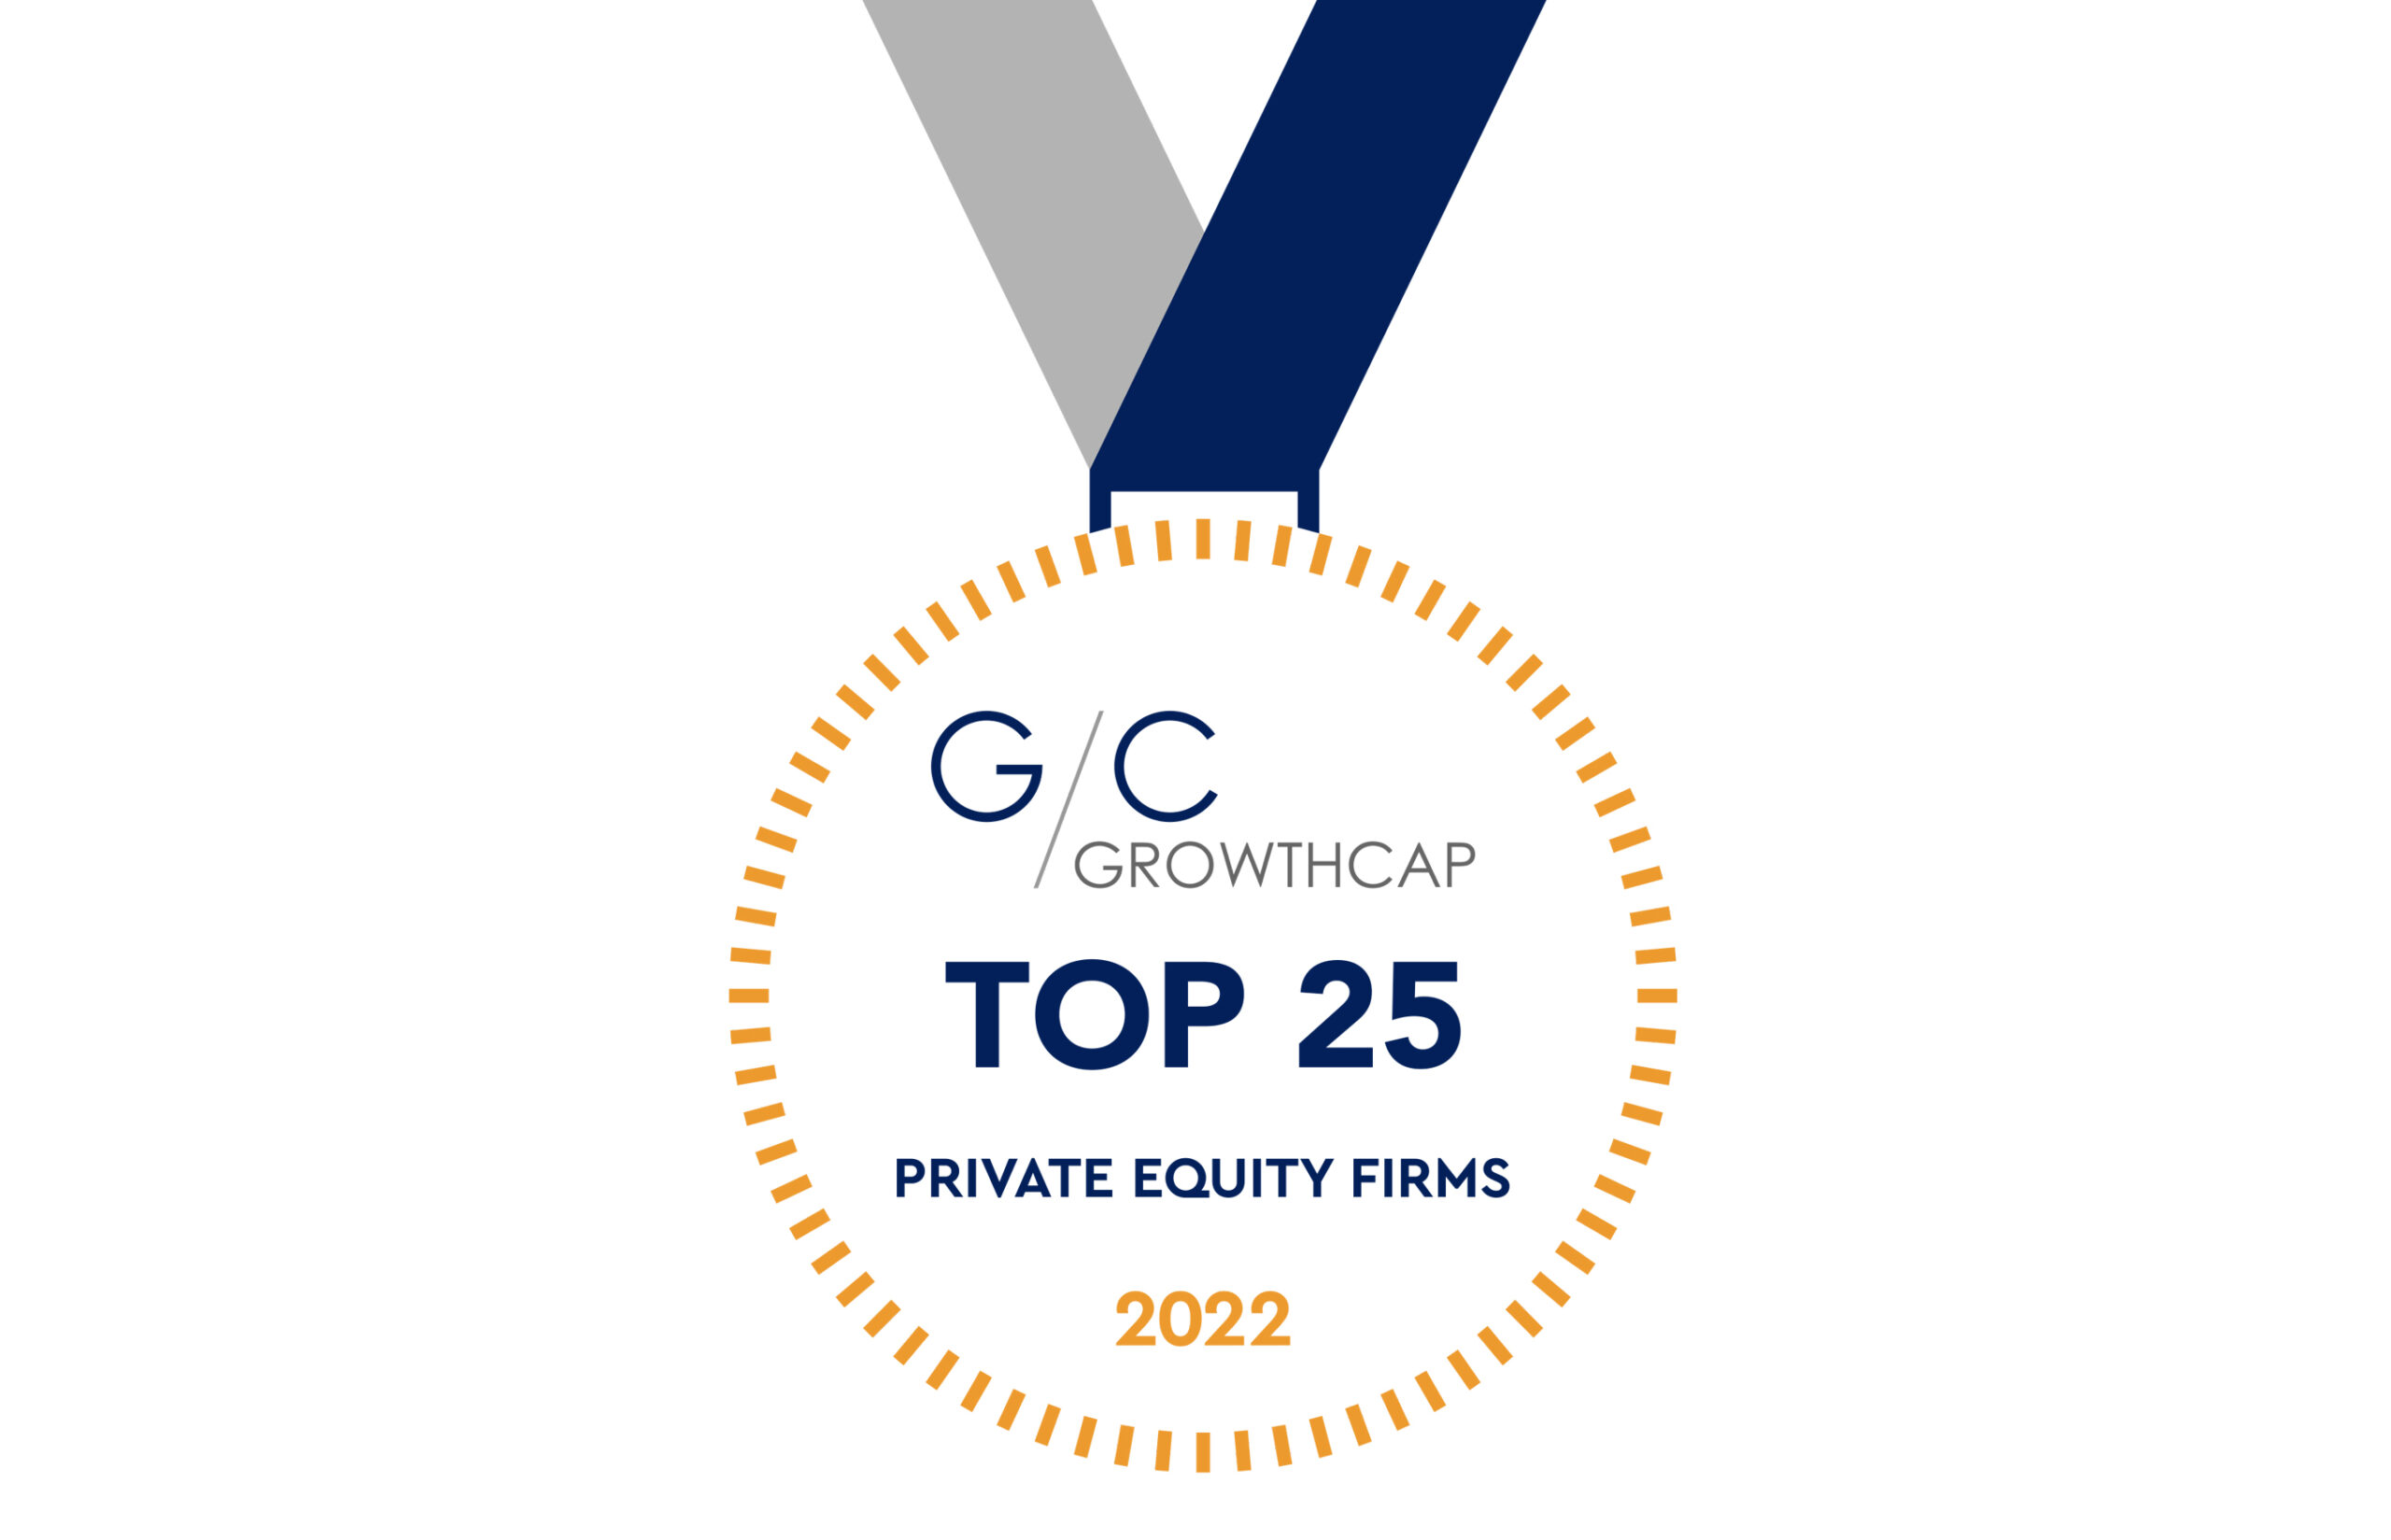 AWARD: GrowthCap Announces The Top Private Equity Firms of 2023